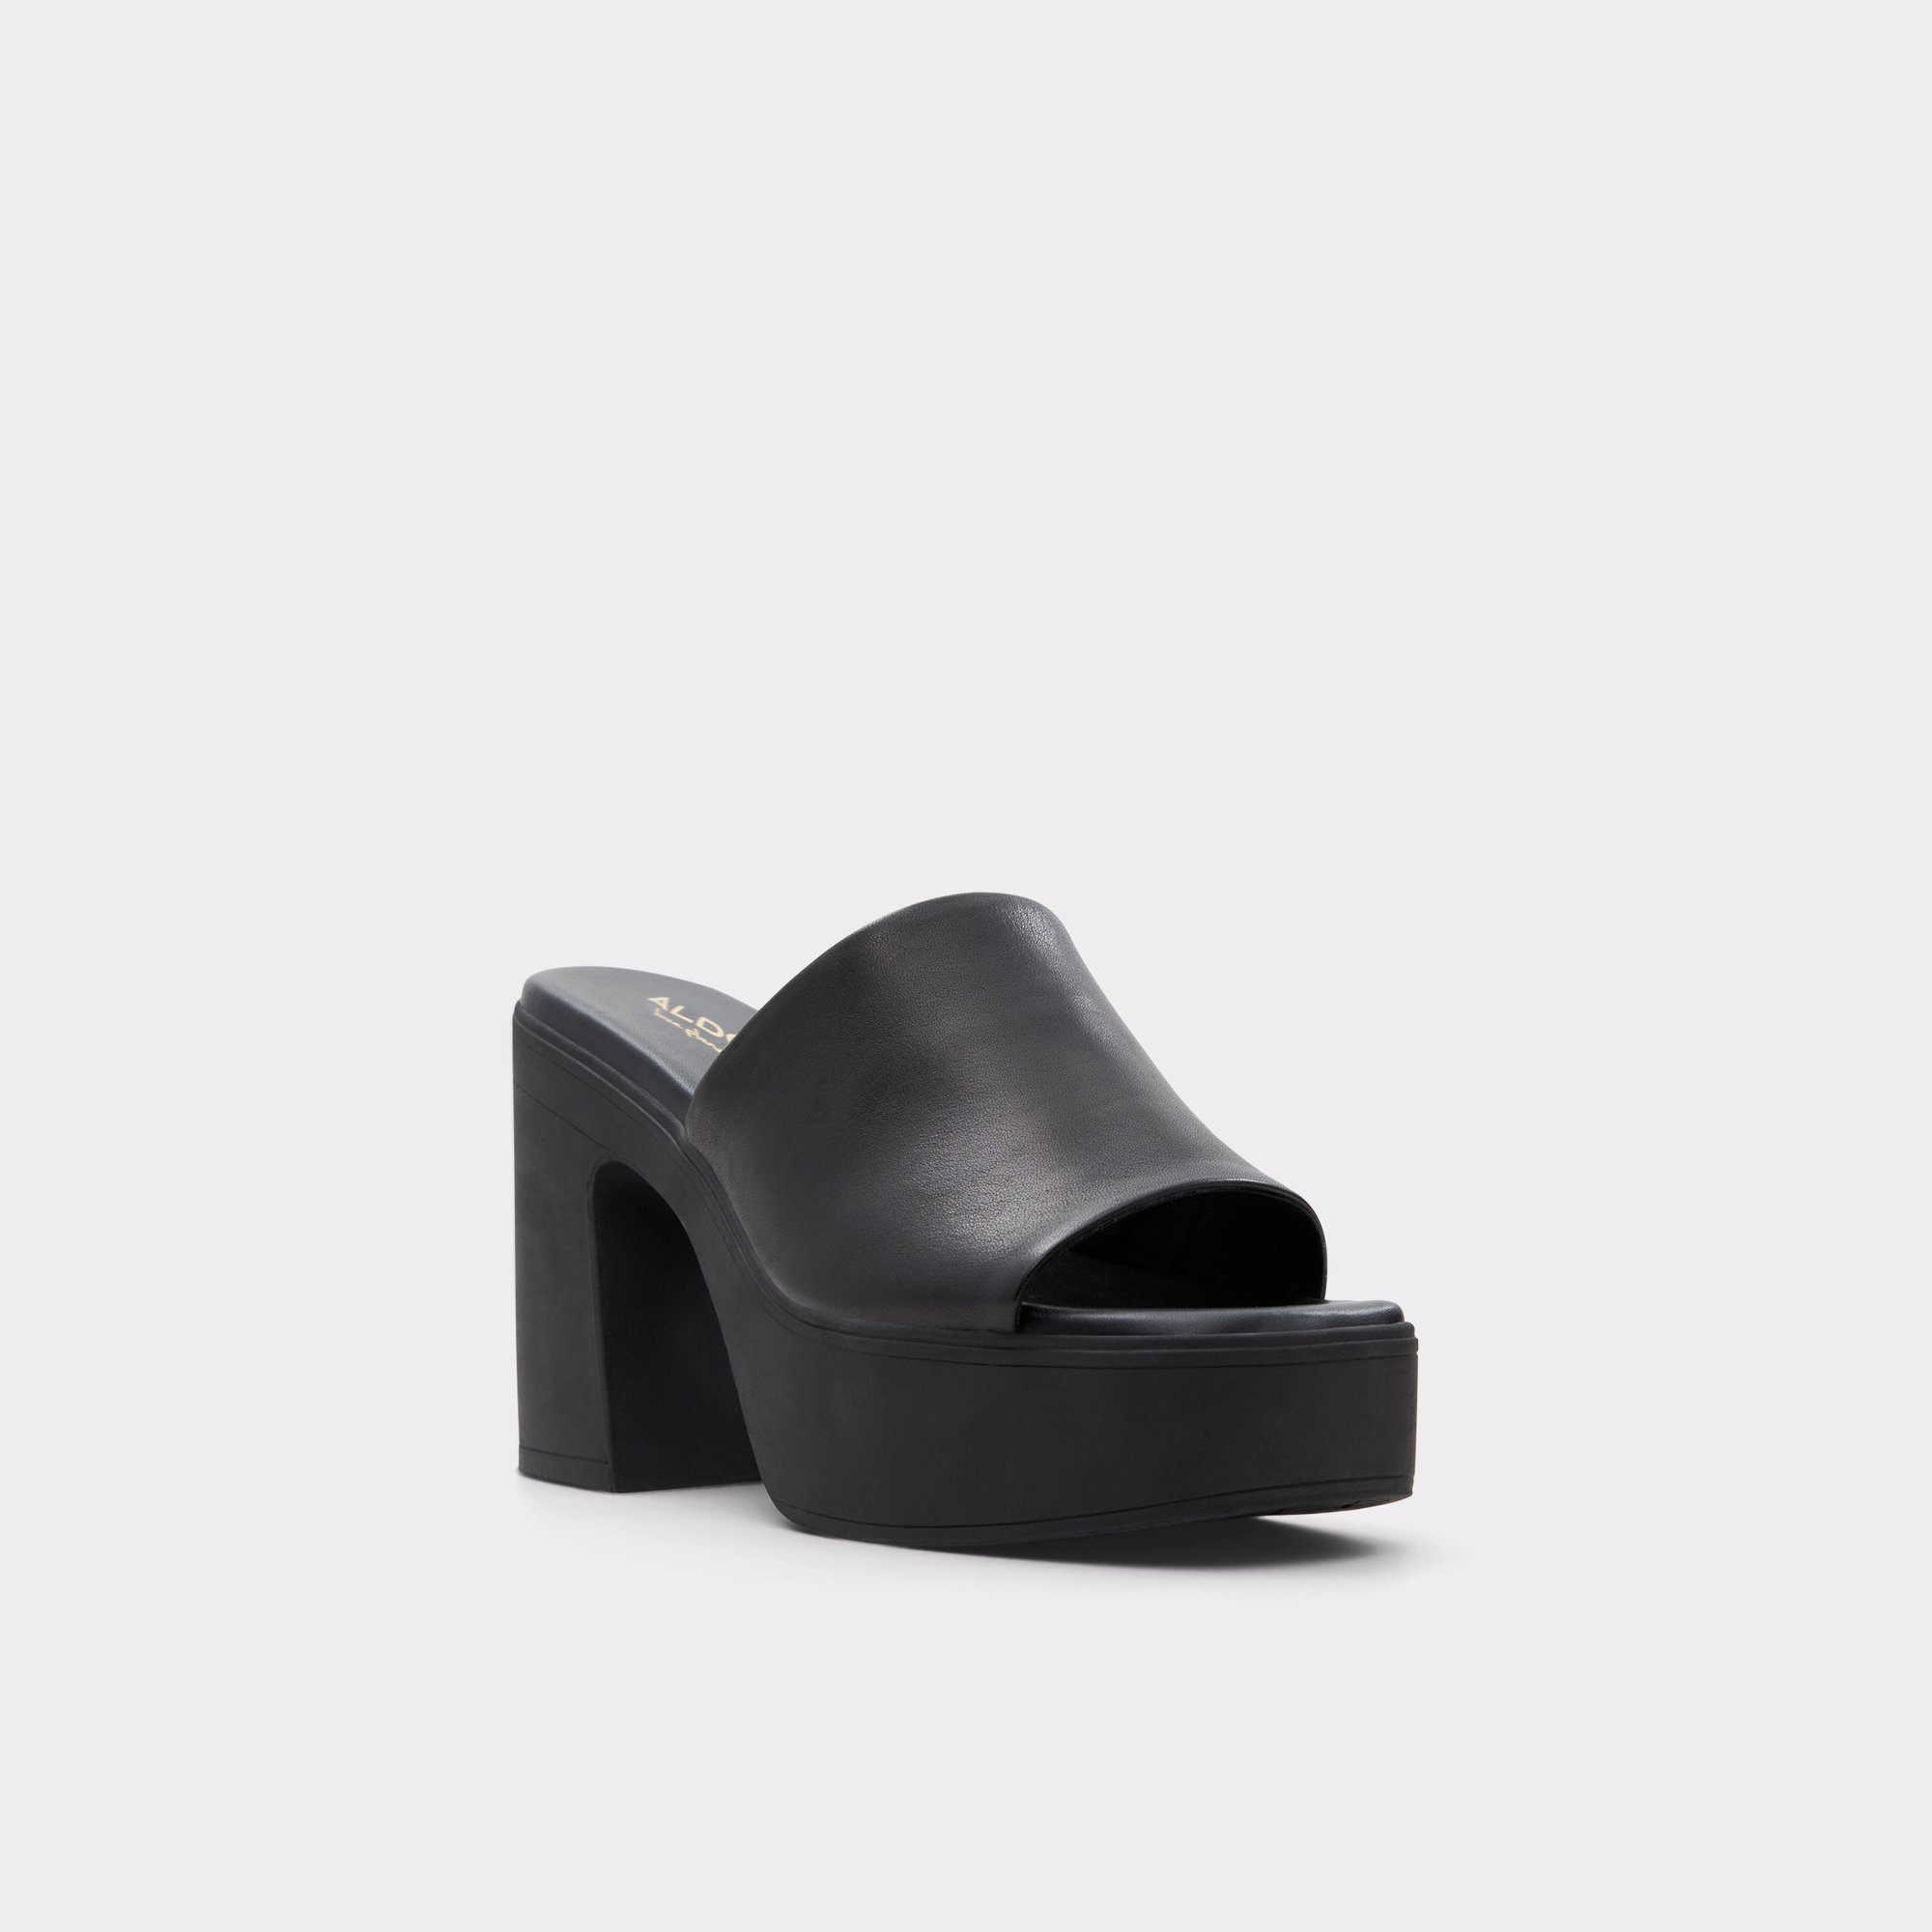 Maysee Black Leather Smooth Women's Mule Shoes | ALDO US